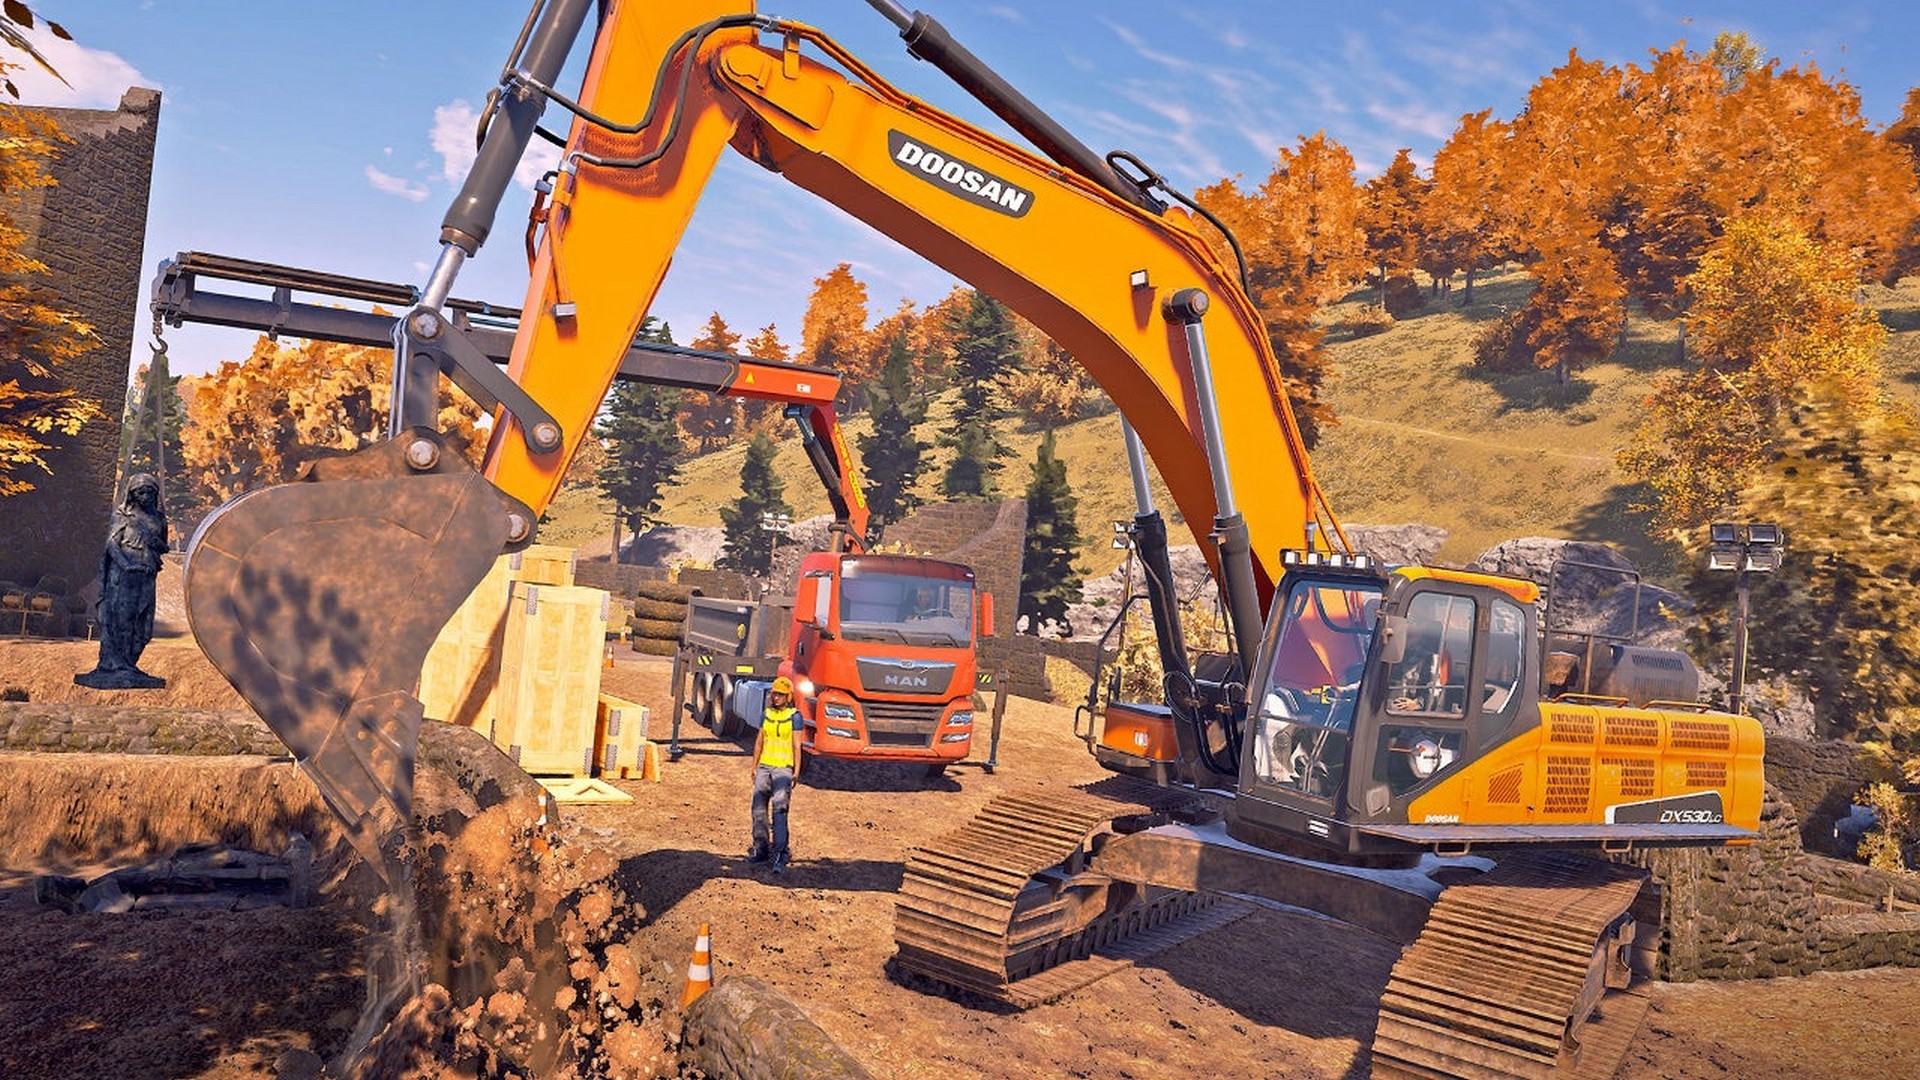 Construction Simulator To Launch With World-Renowned Gaming 25 Machines Equipment Officially | Licensed MKAU Brands From 